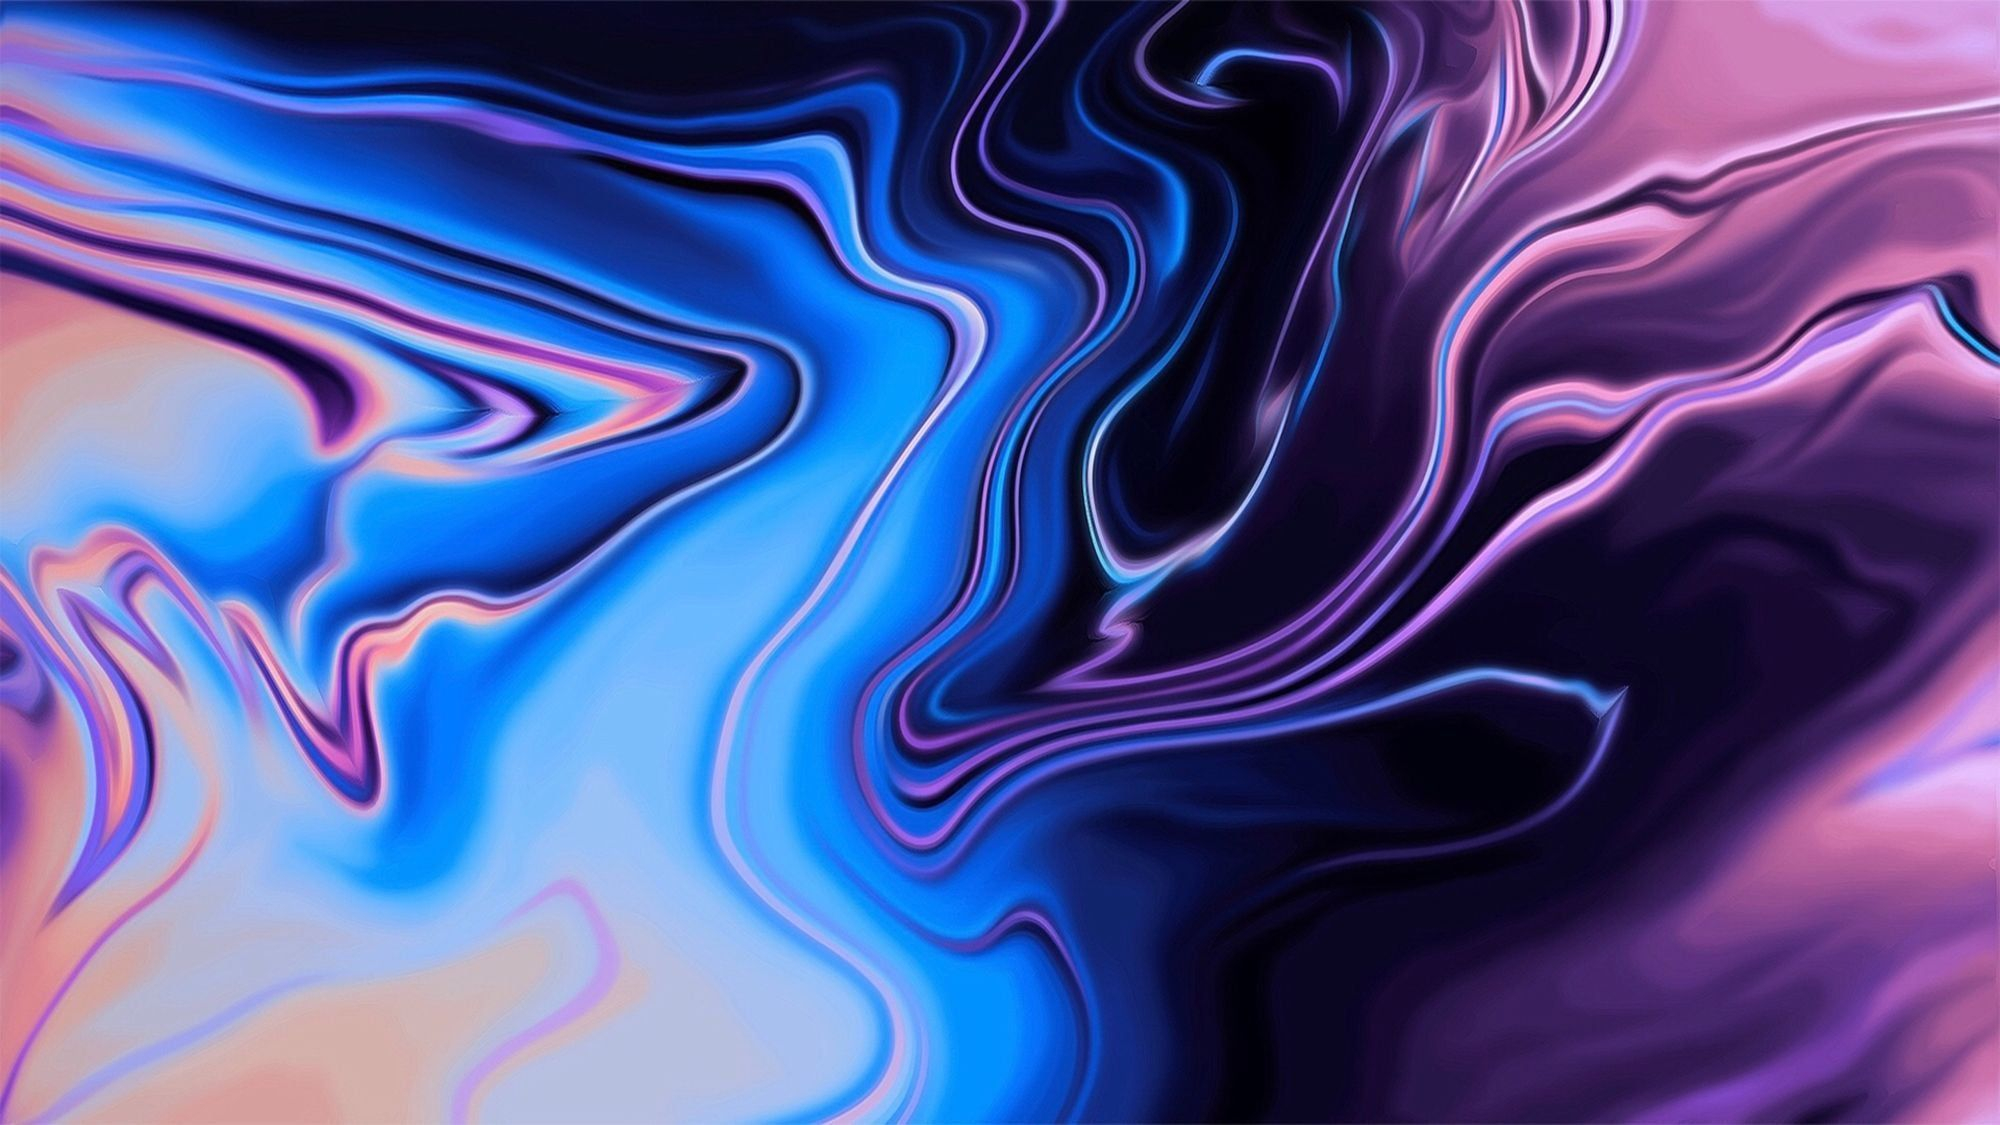 2000x1125 Blue and Purple Abstract Wallpapers Top Free Blue and Purple Abstract Backgrounds